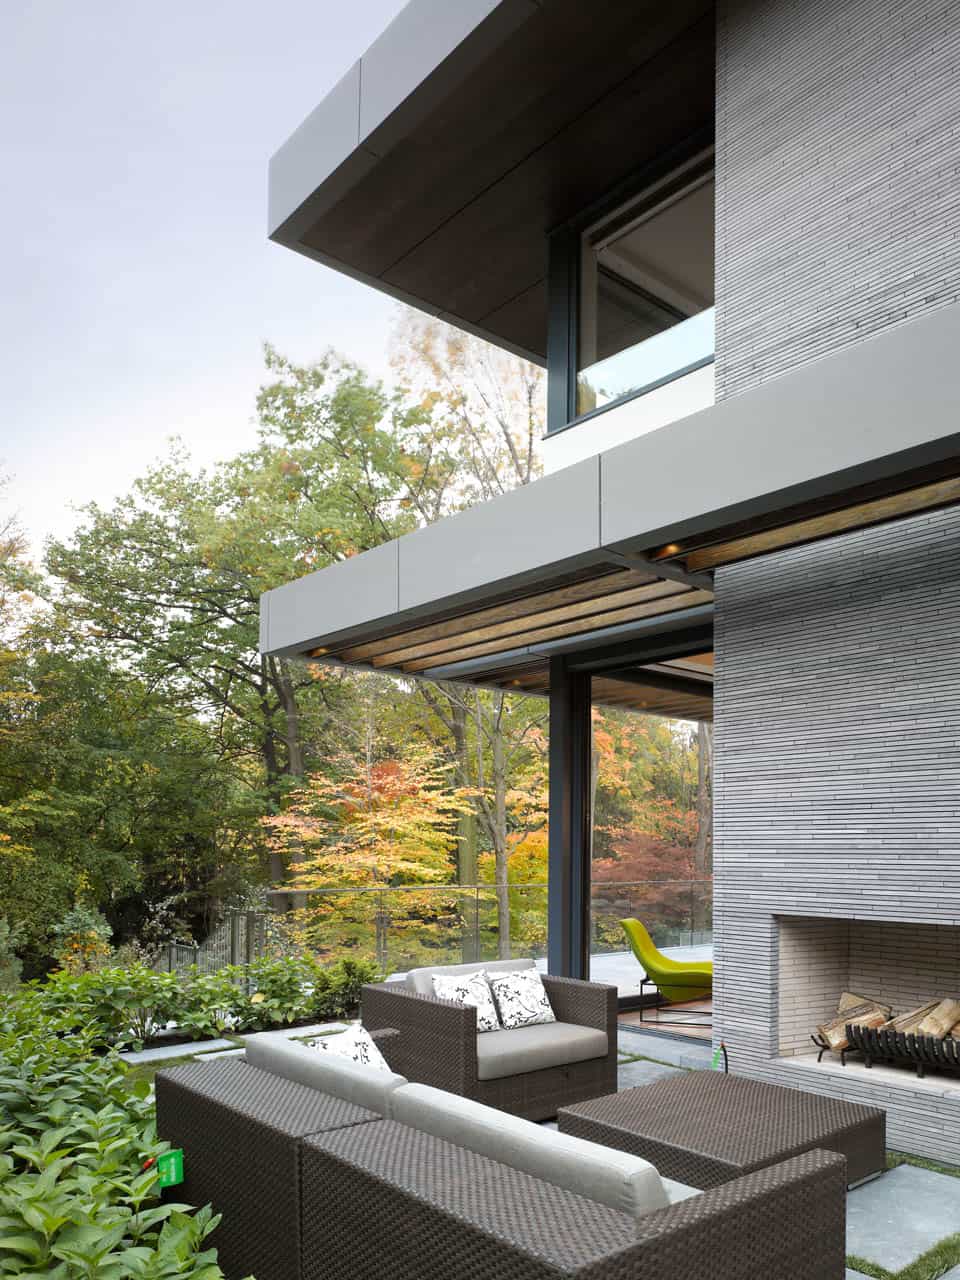 stunning-details-large-open-spaces-define-toronto-home-18-outdoors.jpg